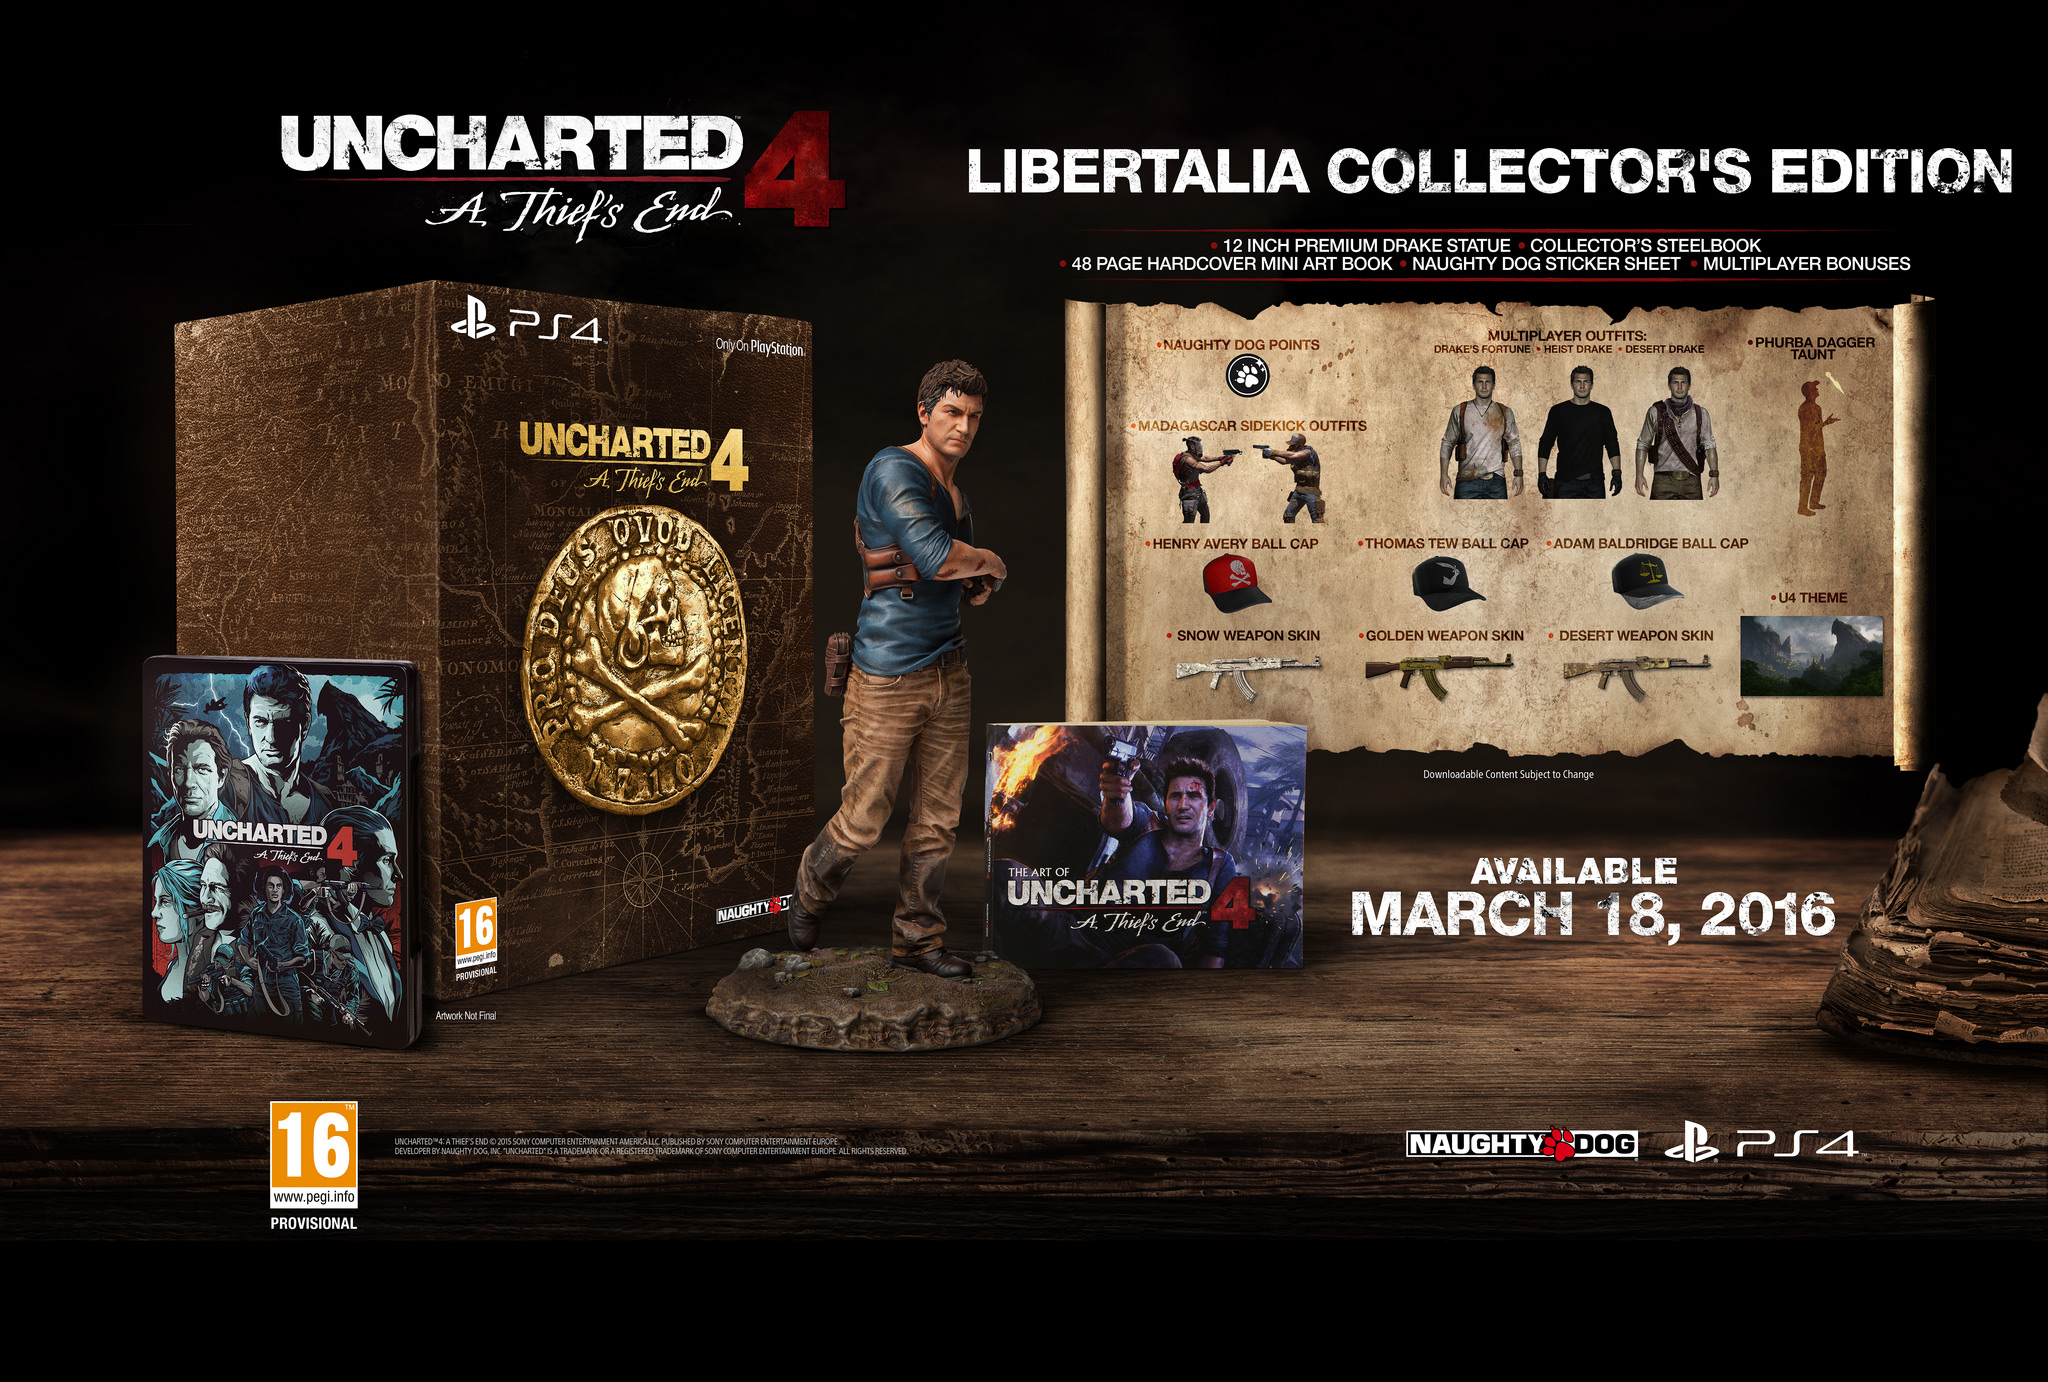 Uncharted 4 A Thief's End Libertalia Collector's Edition